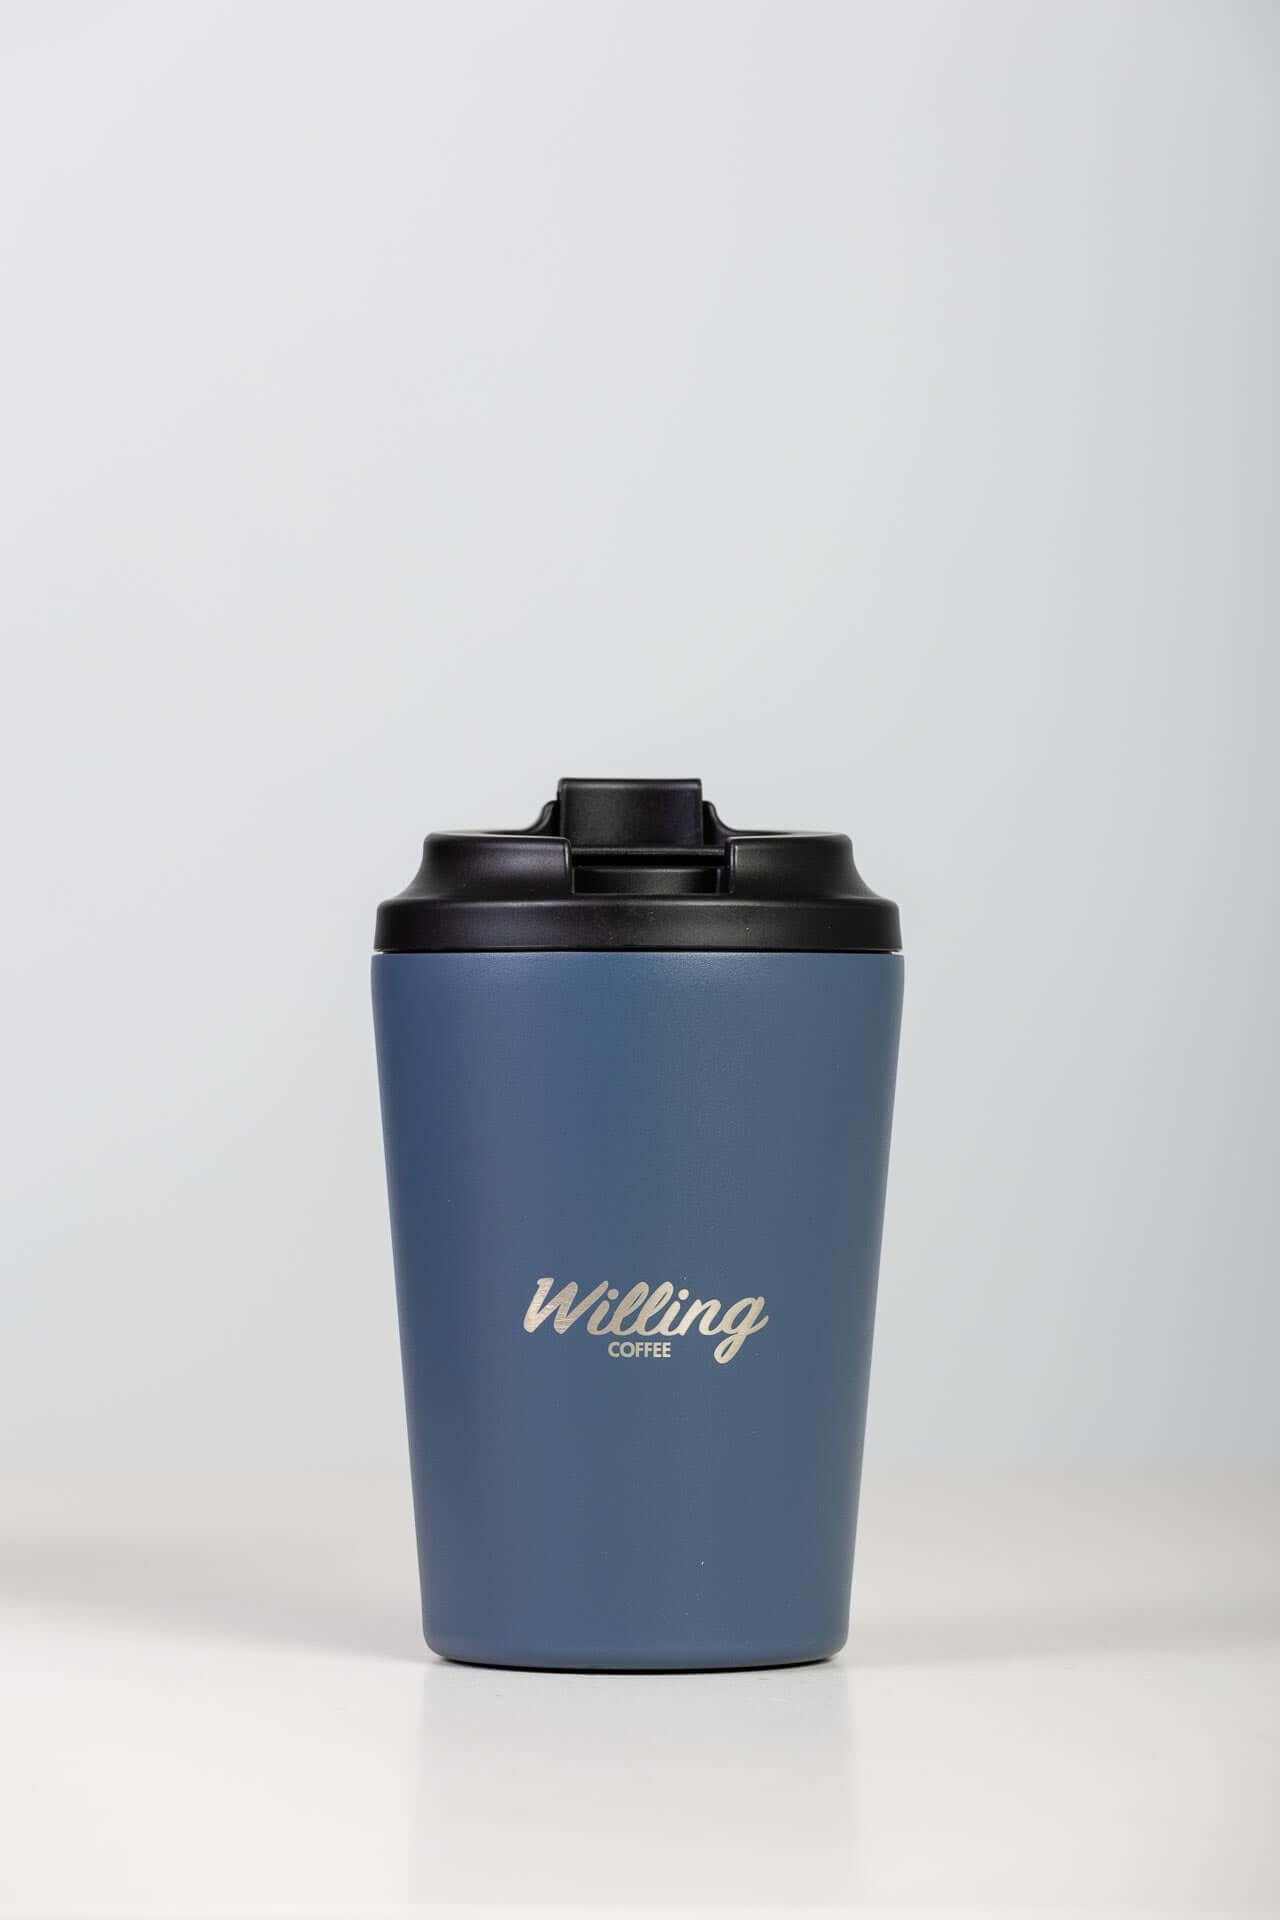 Stylish 12oz Willing Coffee Keep Cup in Navy - Eco-friendly, spill-proof lid, and silicone grip band. Perfect for hot/cold drinks on the go!